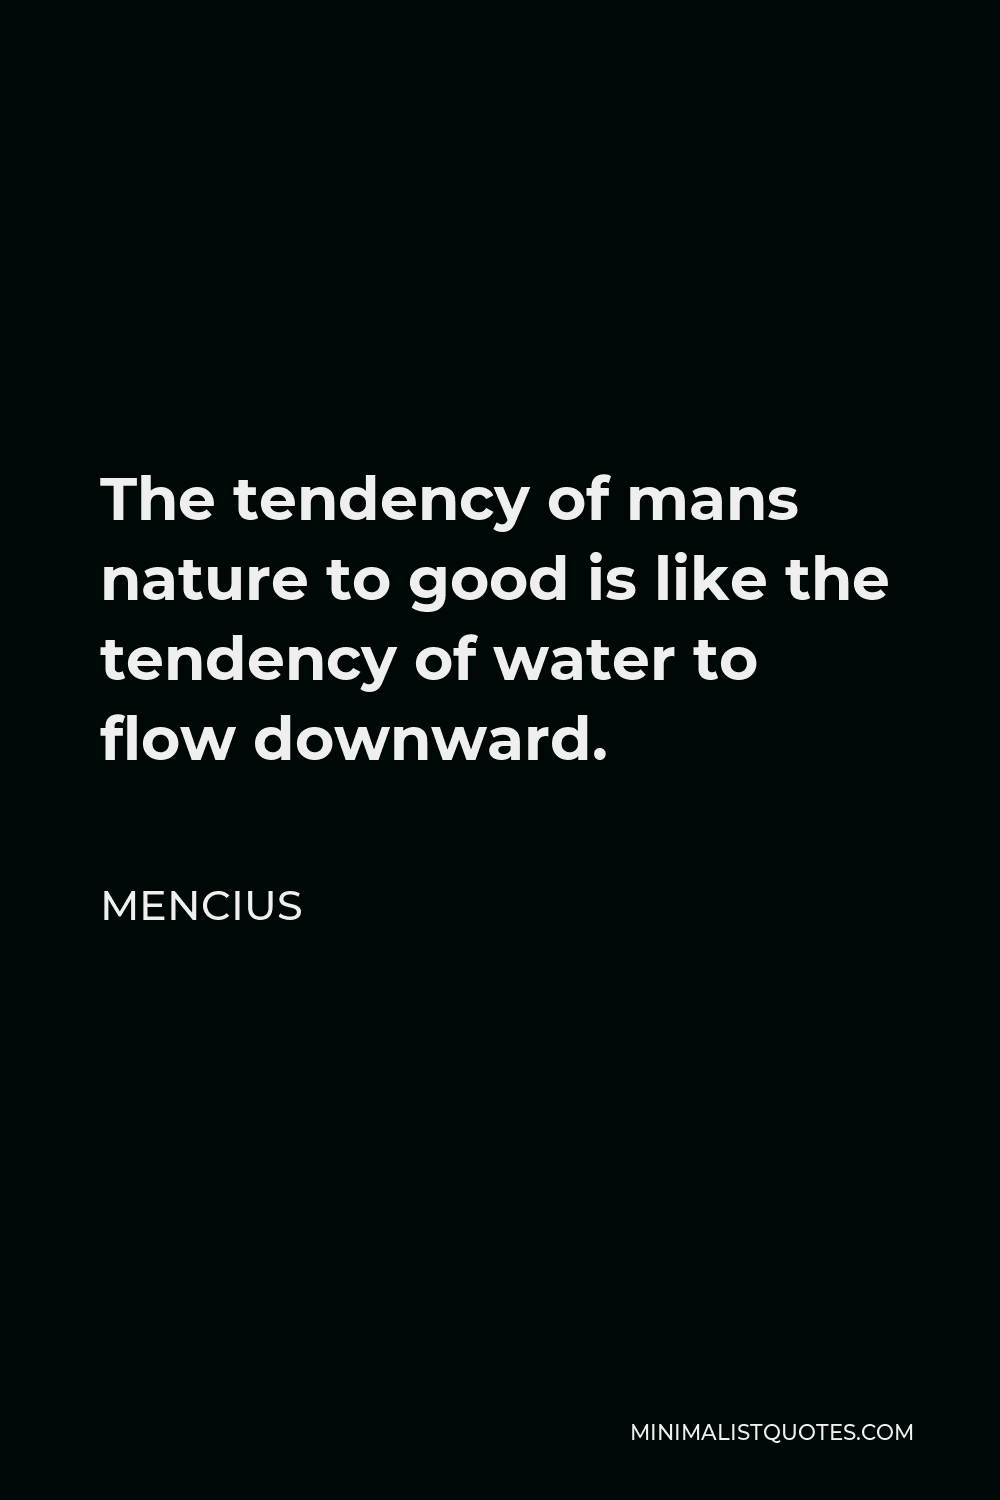 Mencius Quote - The tendency of mans nature to good is like the tendency of water to flow downward.